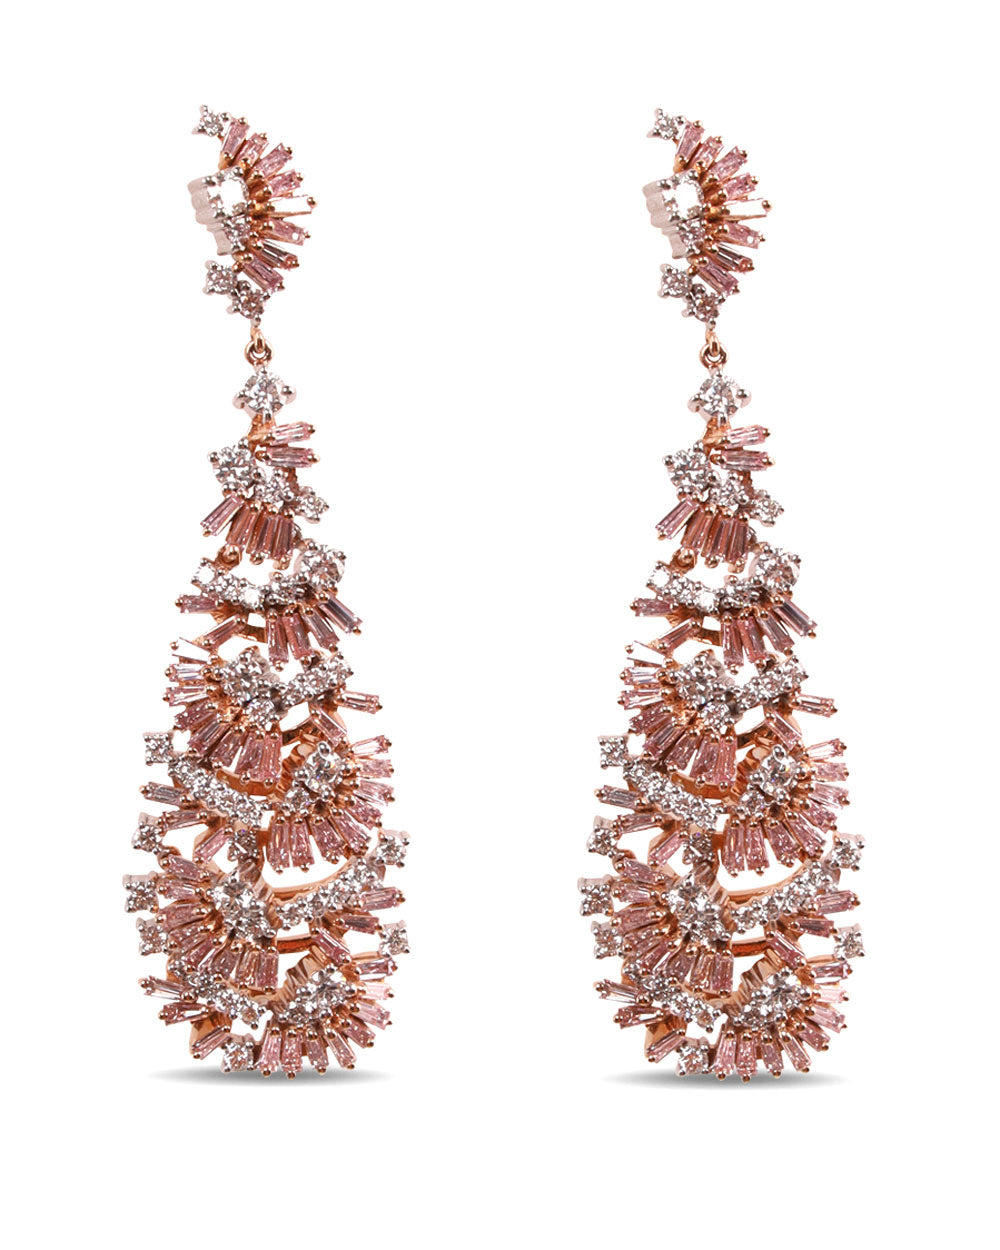 Pink and White Diamond Cluster Earrings